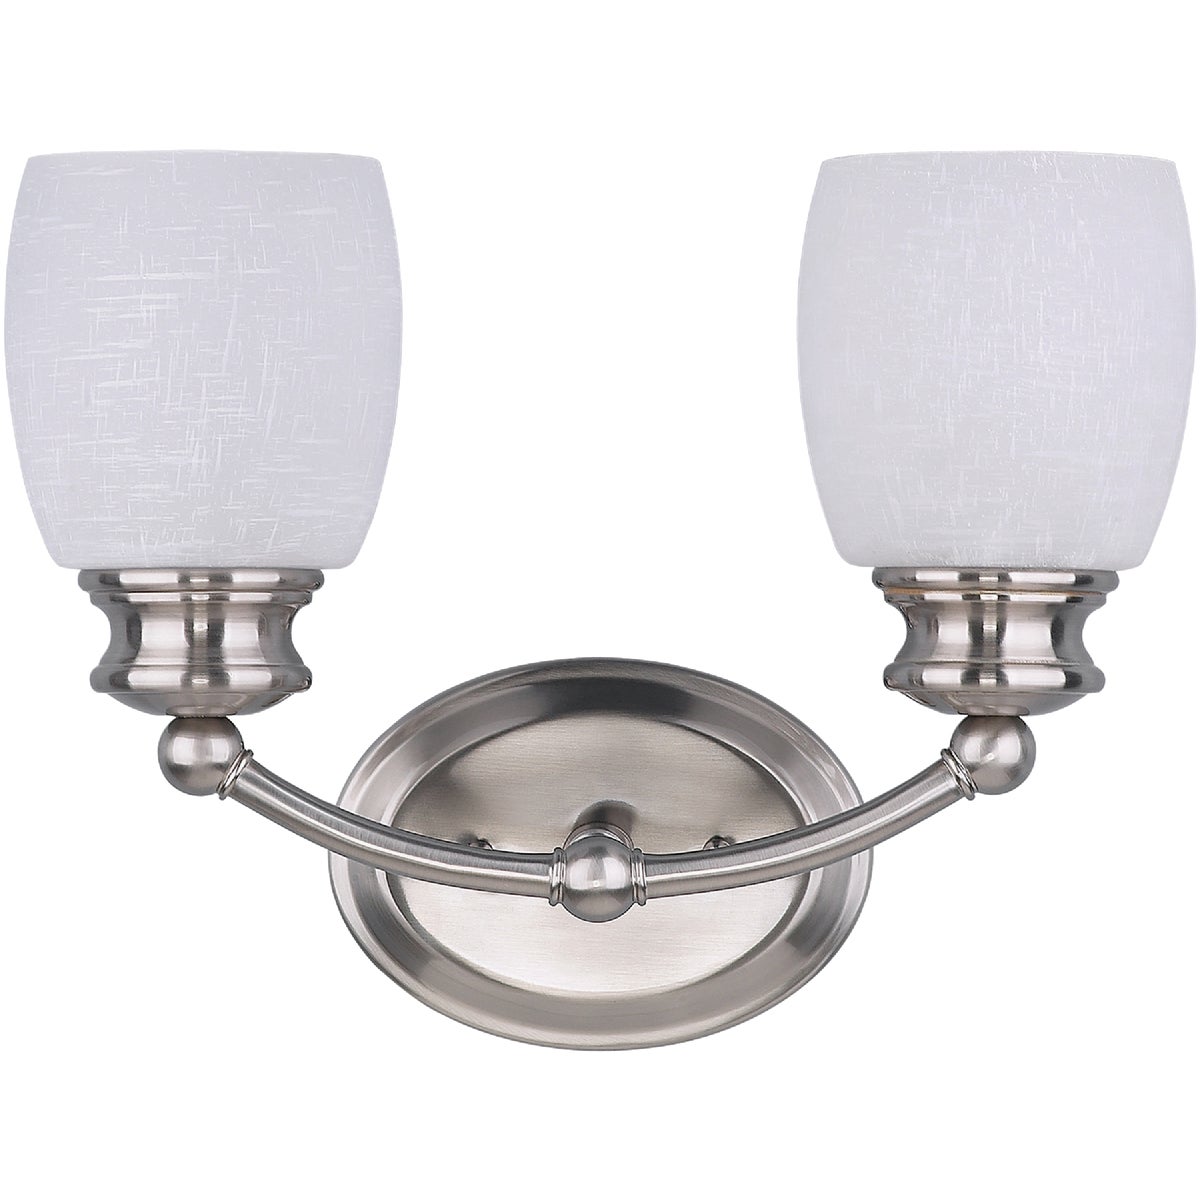 Item 500397, The Palms Vanity wall fixture collection has white linen glass.